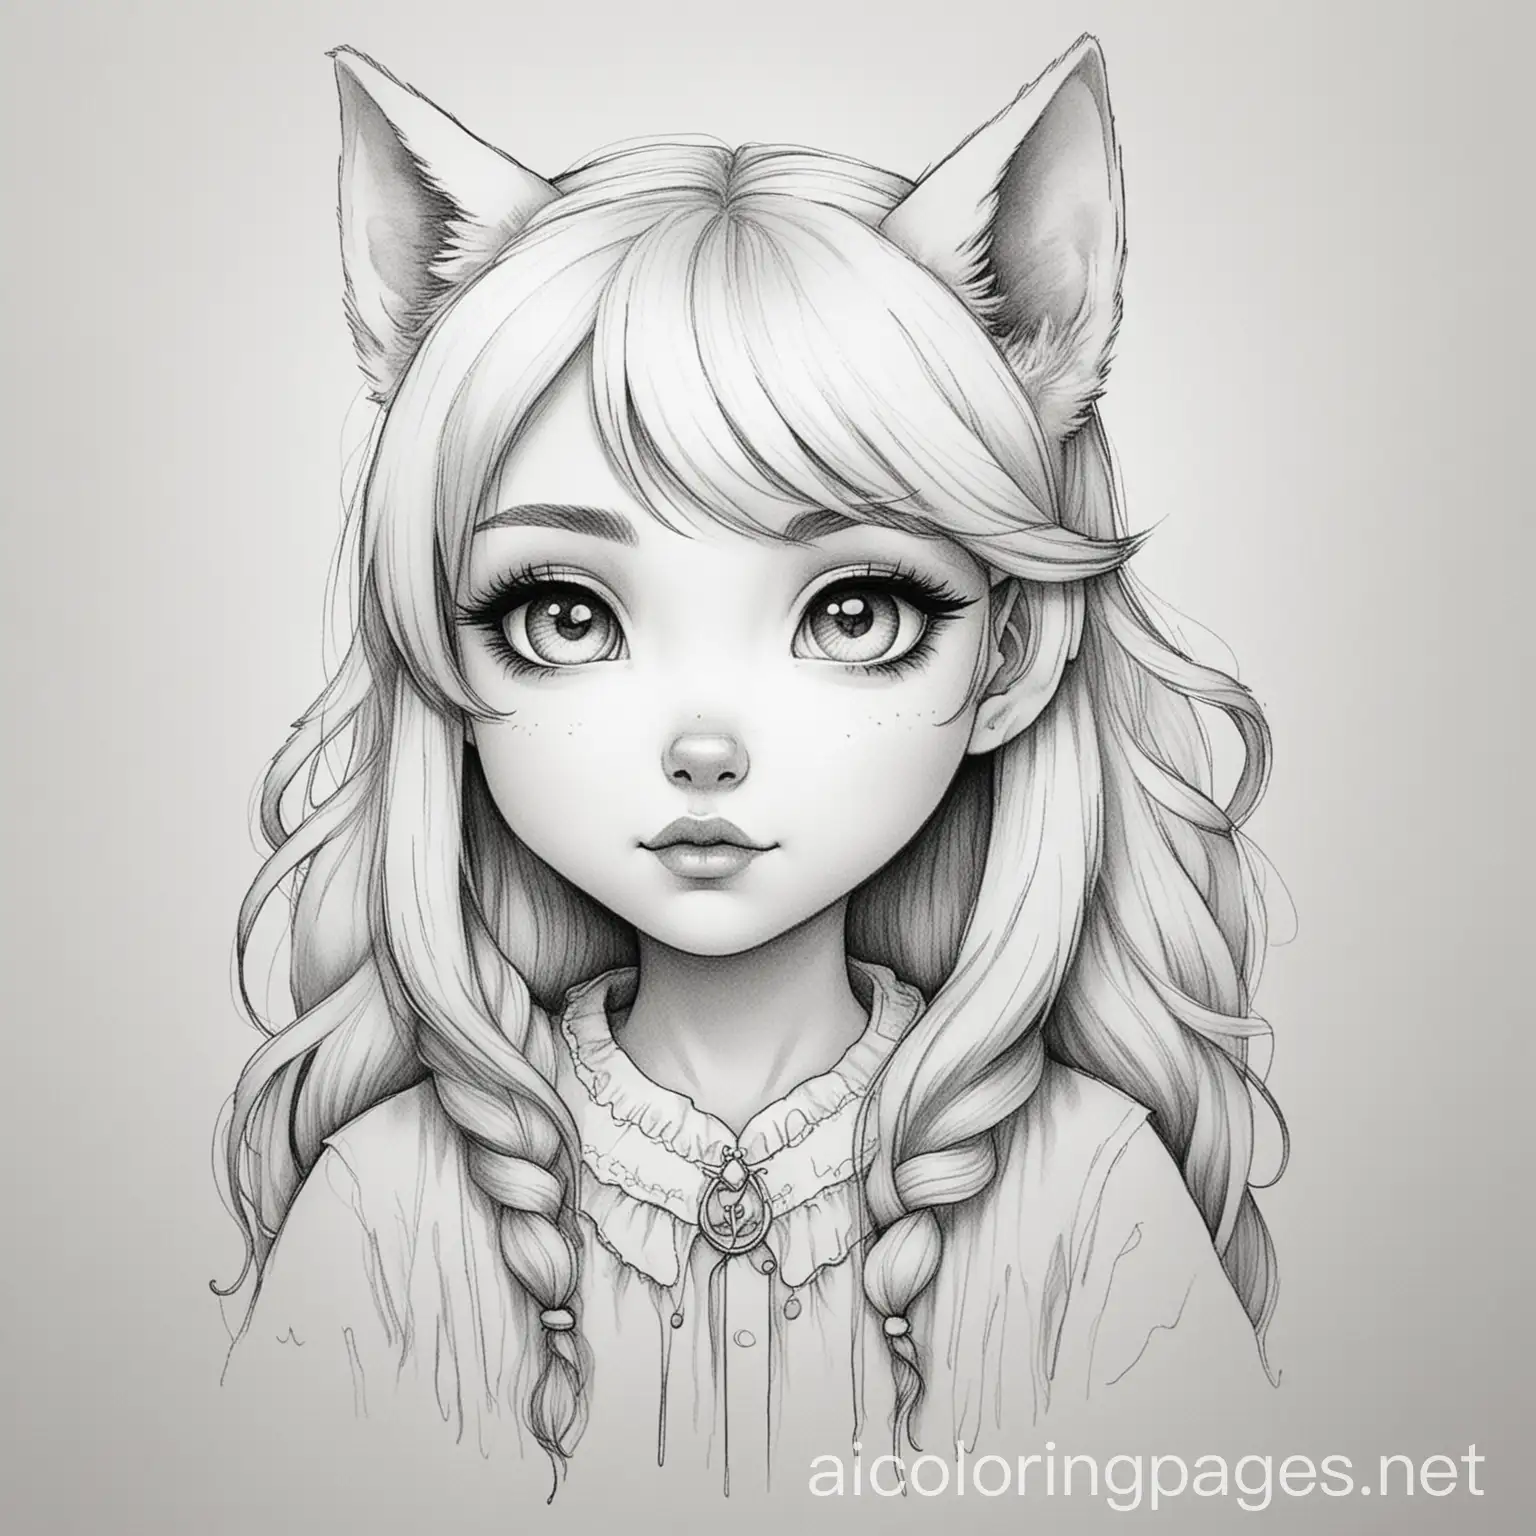 Little-Wolf-Girl-Coloring-Page-with-Ample-White-Space